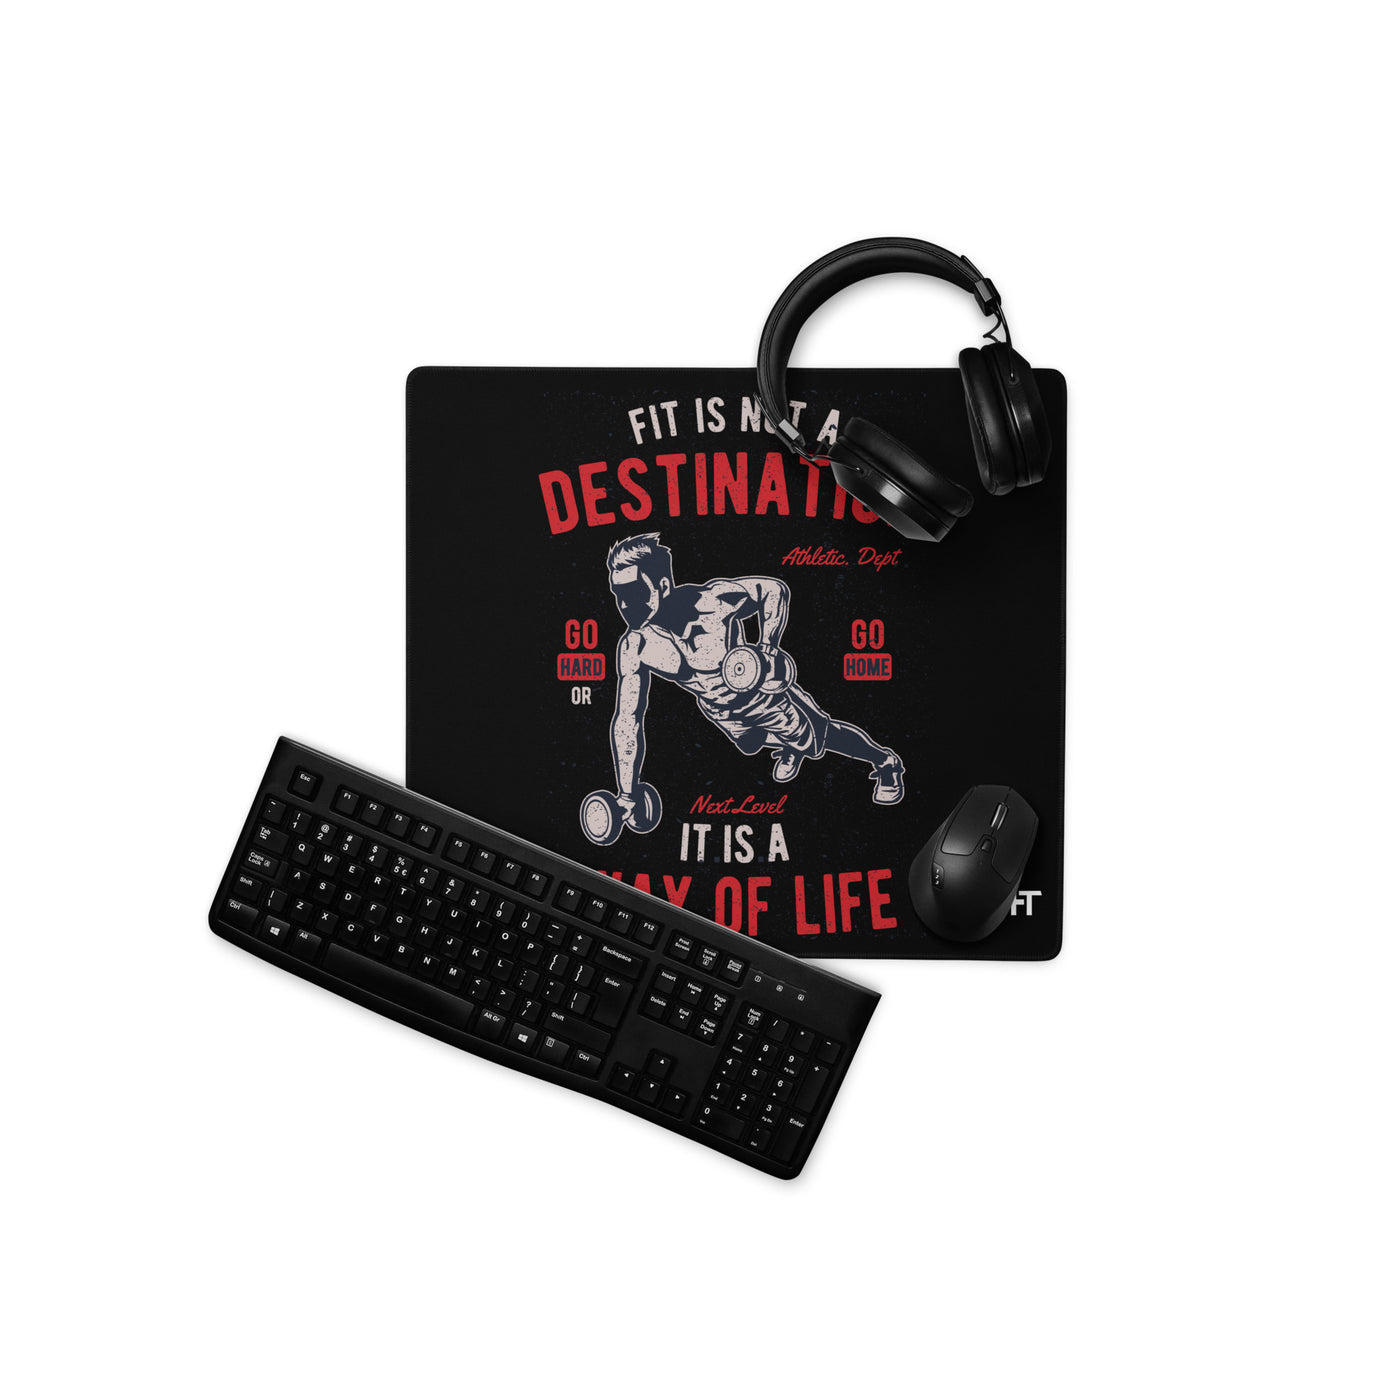 Fit is not a destination: it is a way of life - Desk Mat